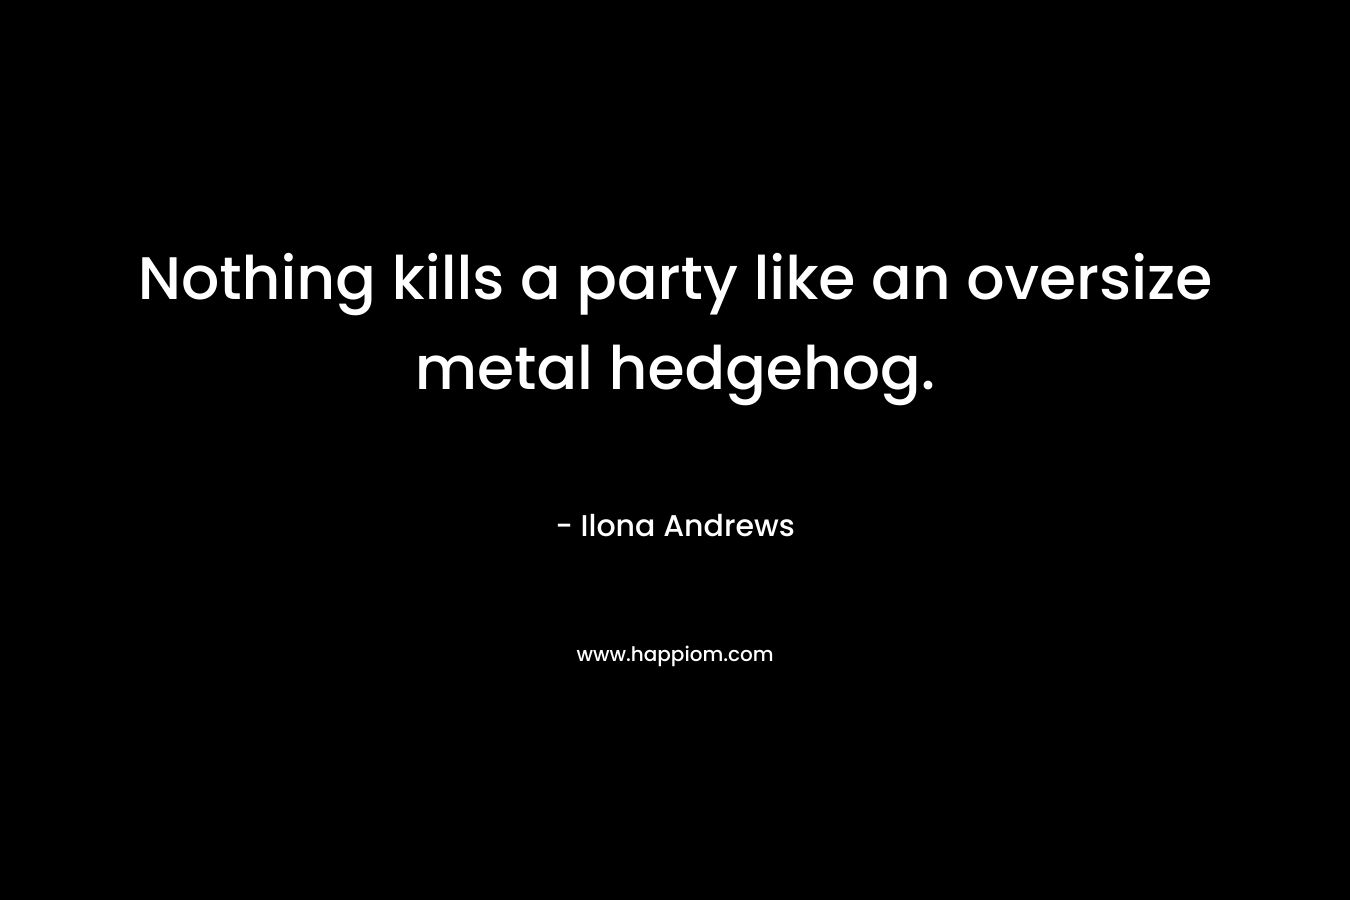 Nothing kills a party like an oversize metal hedgehog. – Ilona Andrews